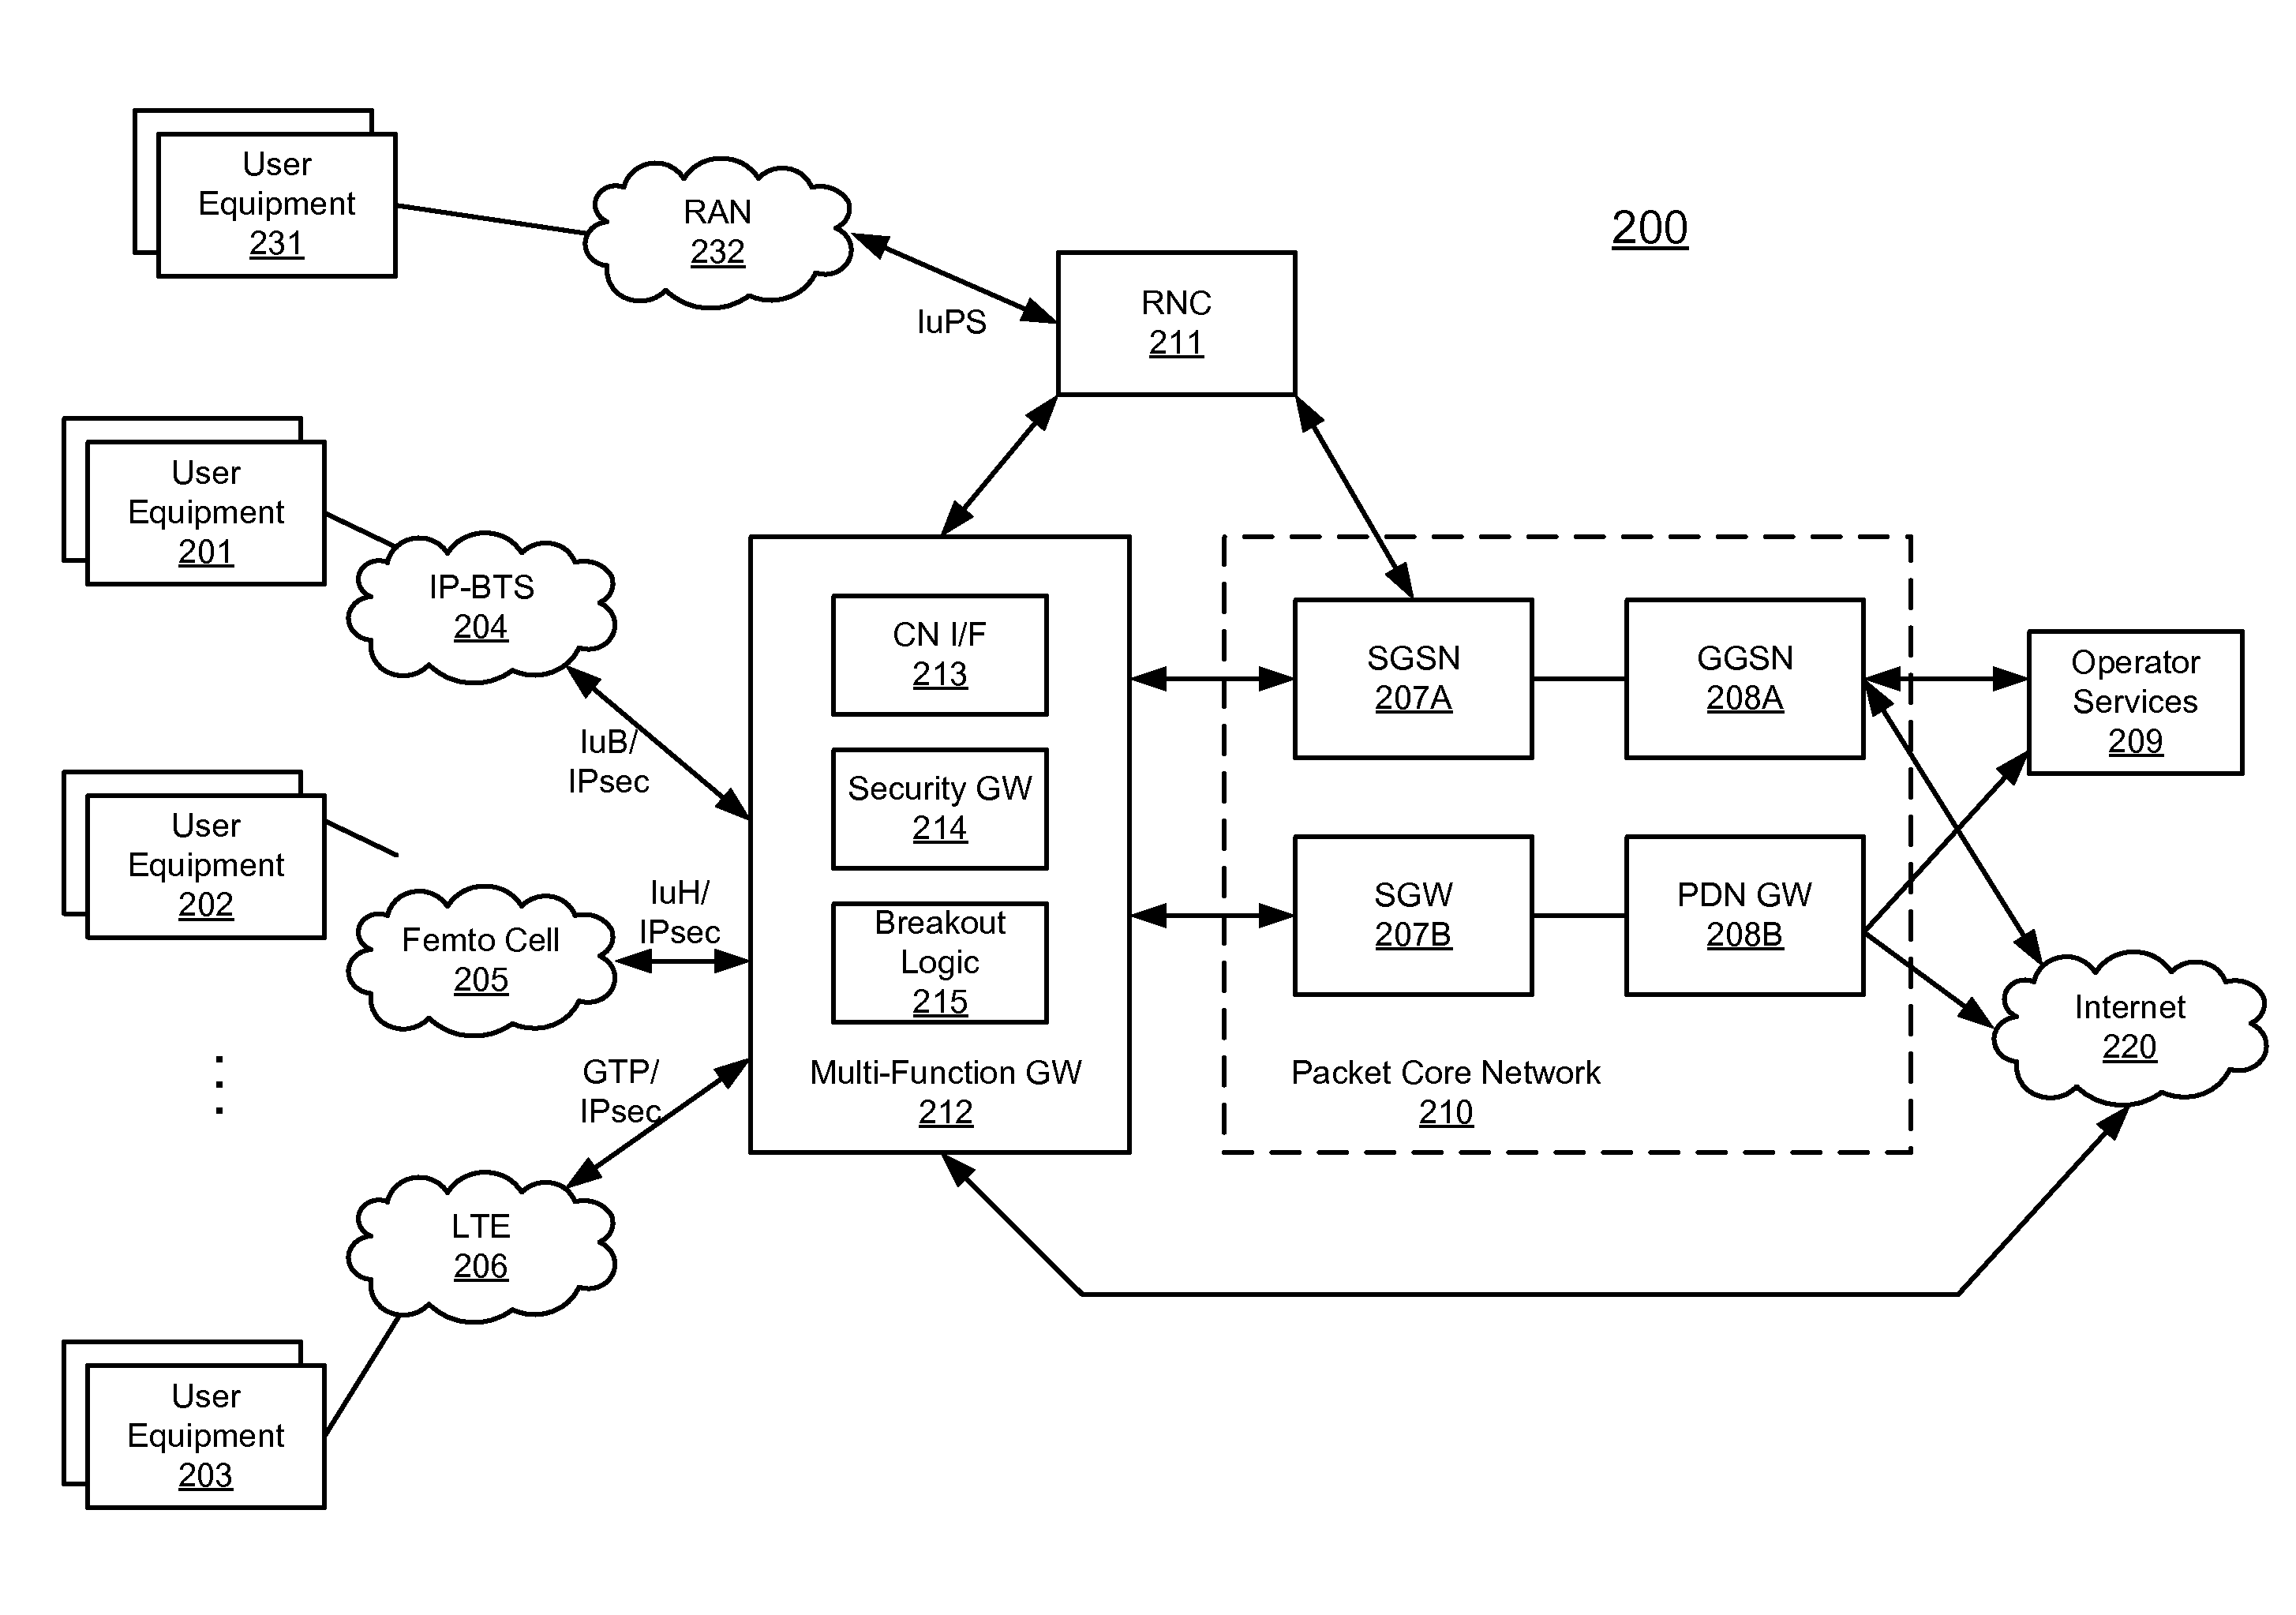 Method and system for bypassing 3GPP packet switched core network when accessing internet from 3GPP UEs using IP-BTS, femto cell, or LTE access network